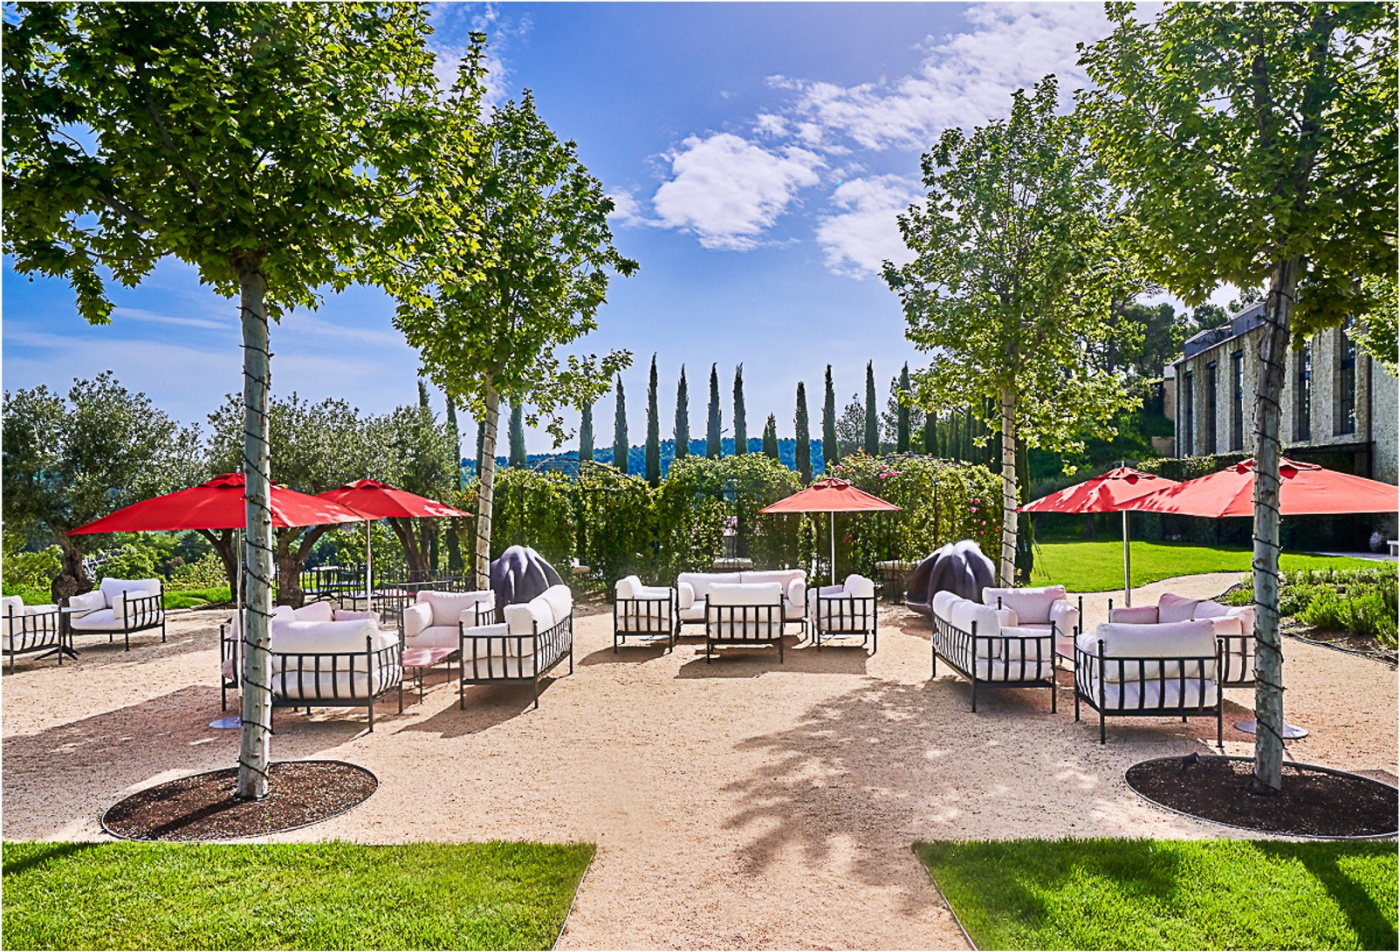 Relax garden area at restaurant of luxury venue in Provence with private chef